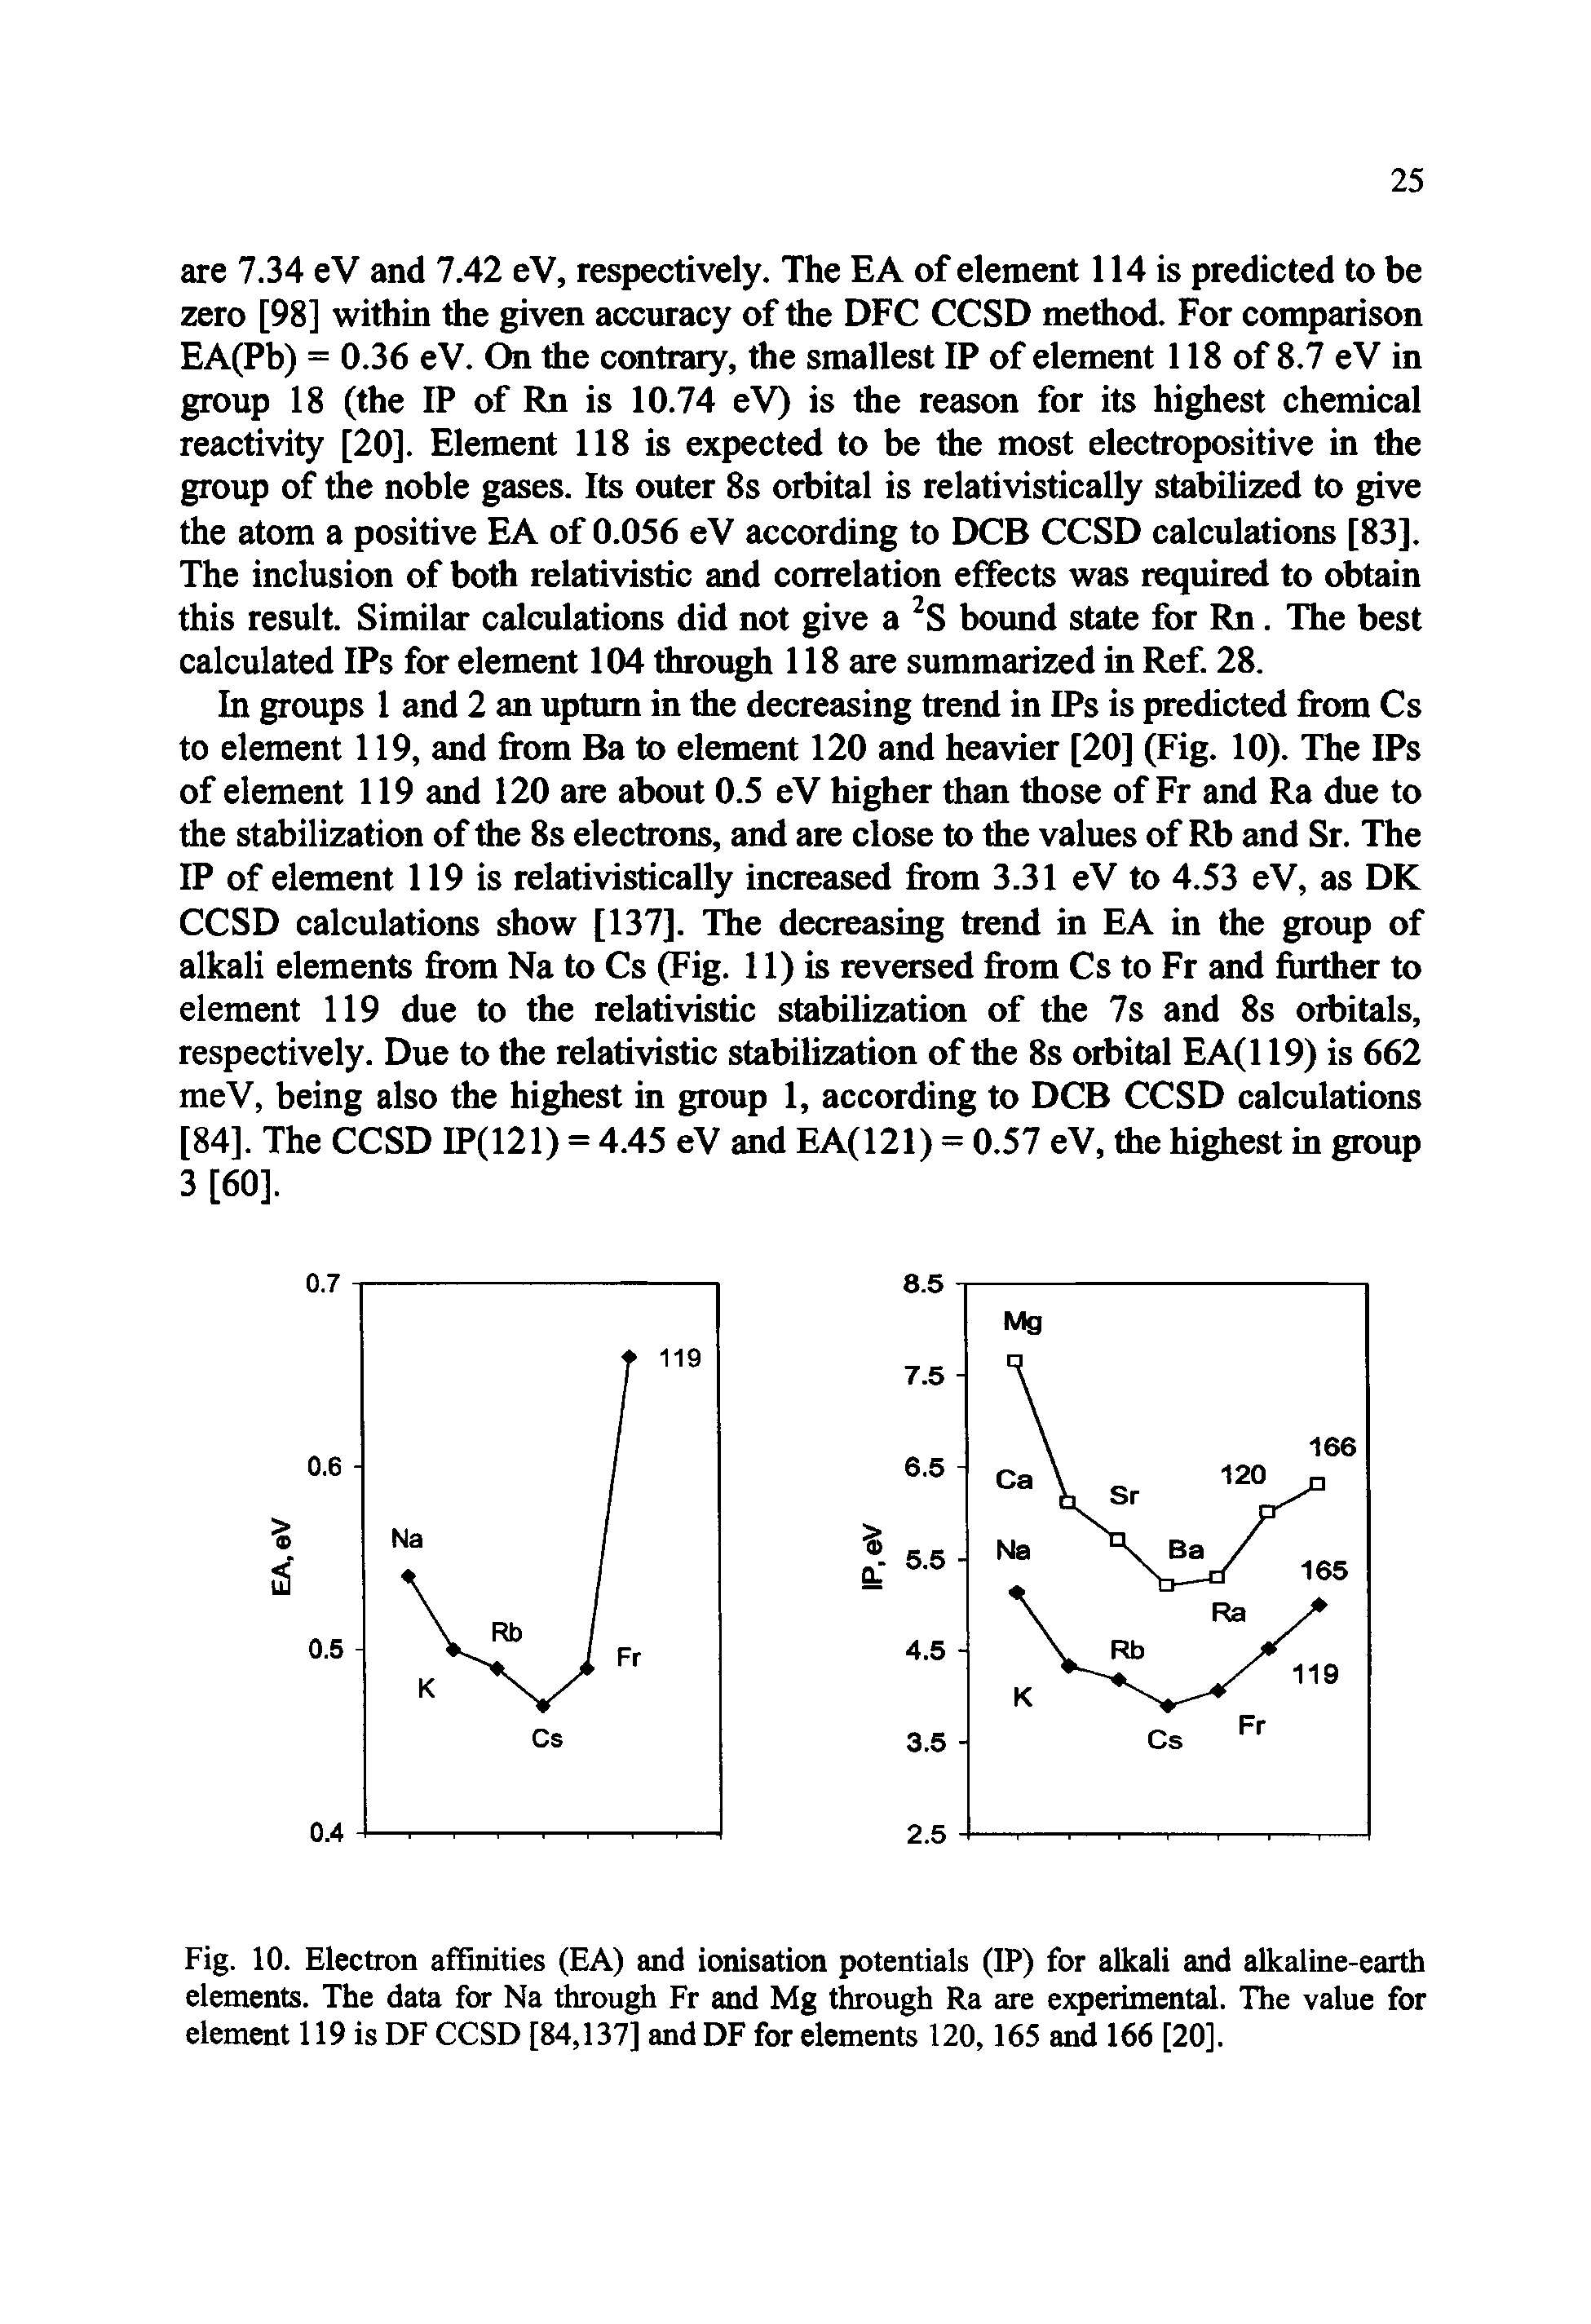 Fig. 10. Electron affinities (EA) and ionisation potentials (IP) for alkali and alkaline-earth elements. The data for Na through Fr and Mg through Ra are experimental. The value for element 119 is DF CCSD [84,137] and DF for elements 120,165 and 166 [20].